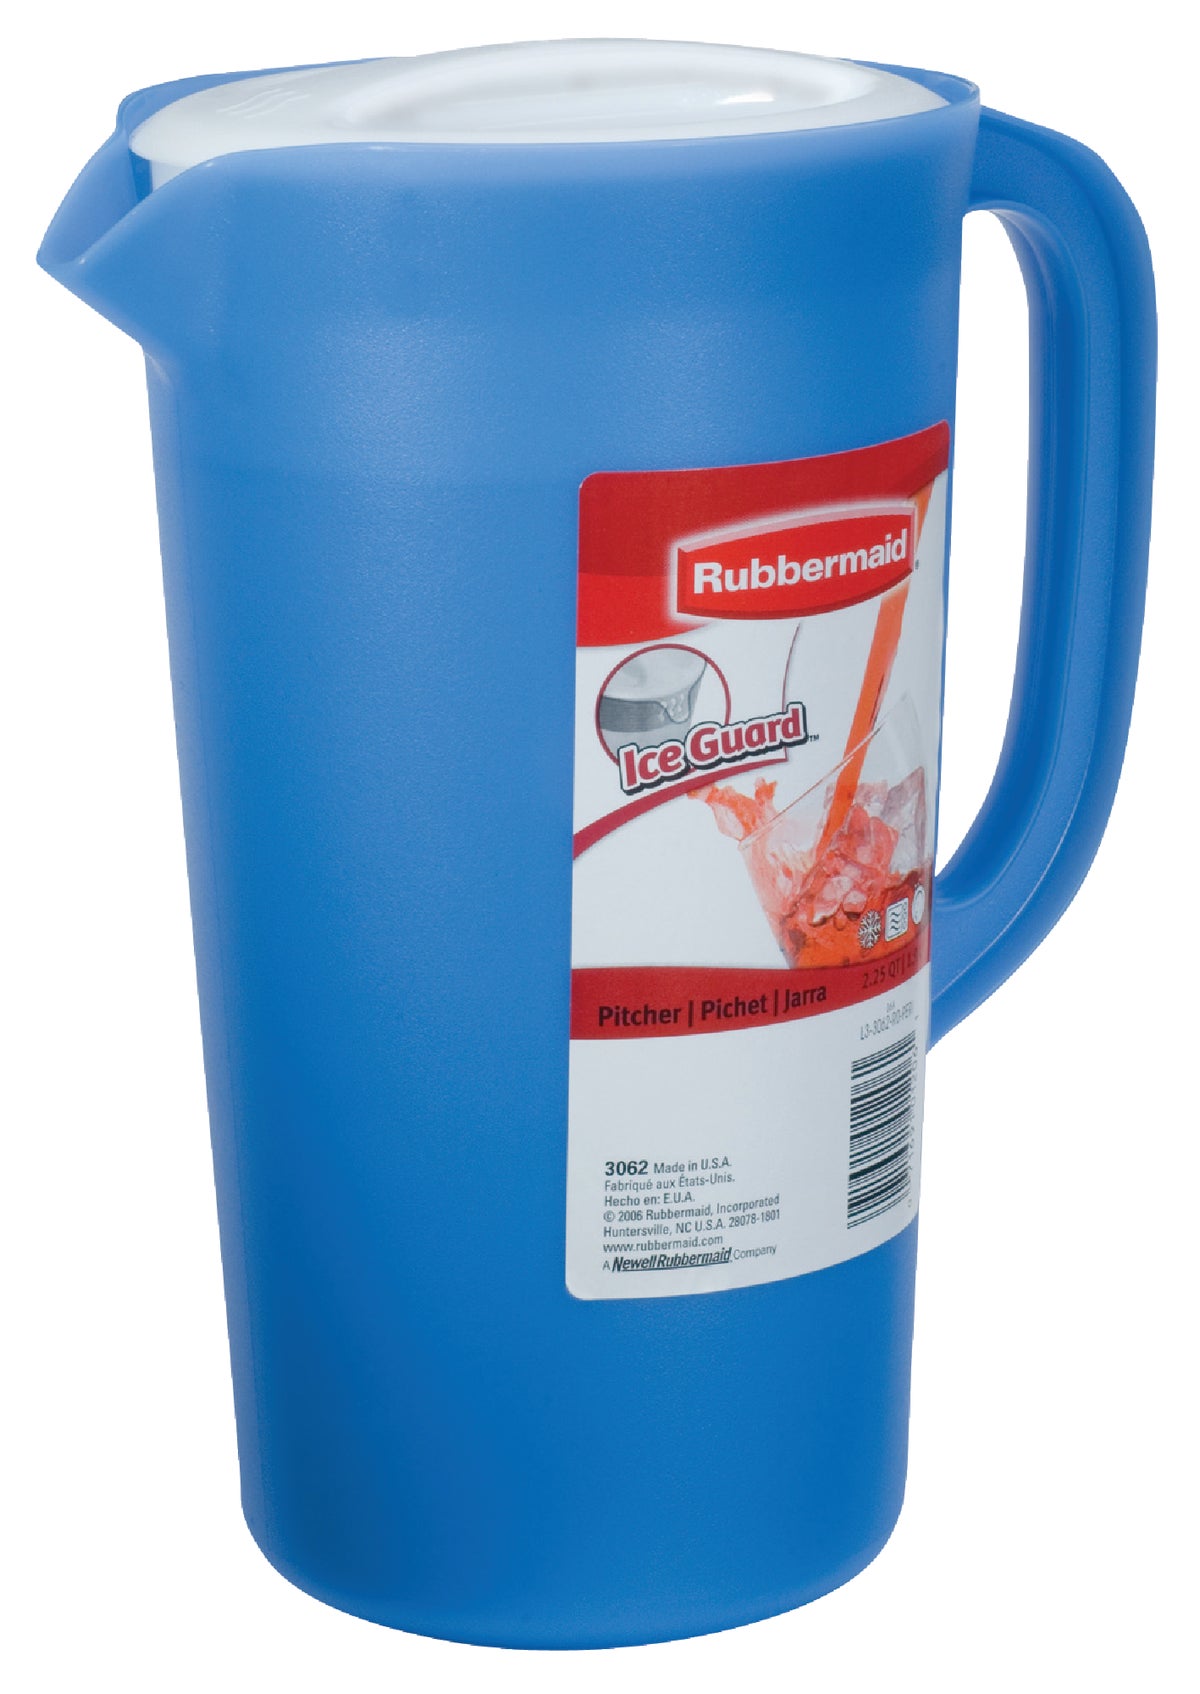 Rubbermaid 2 Quart Pitcher with Ice Guard